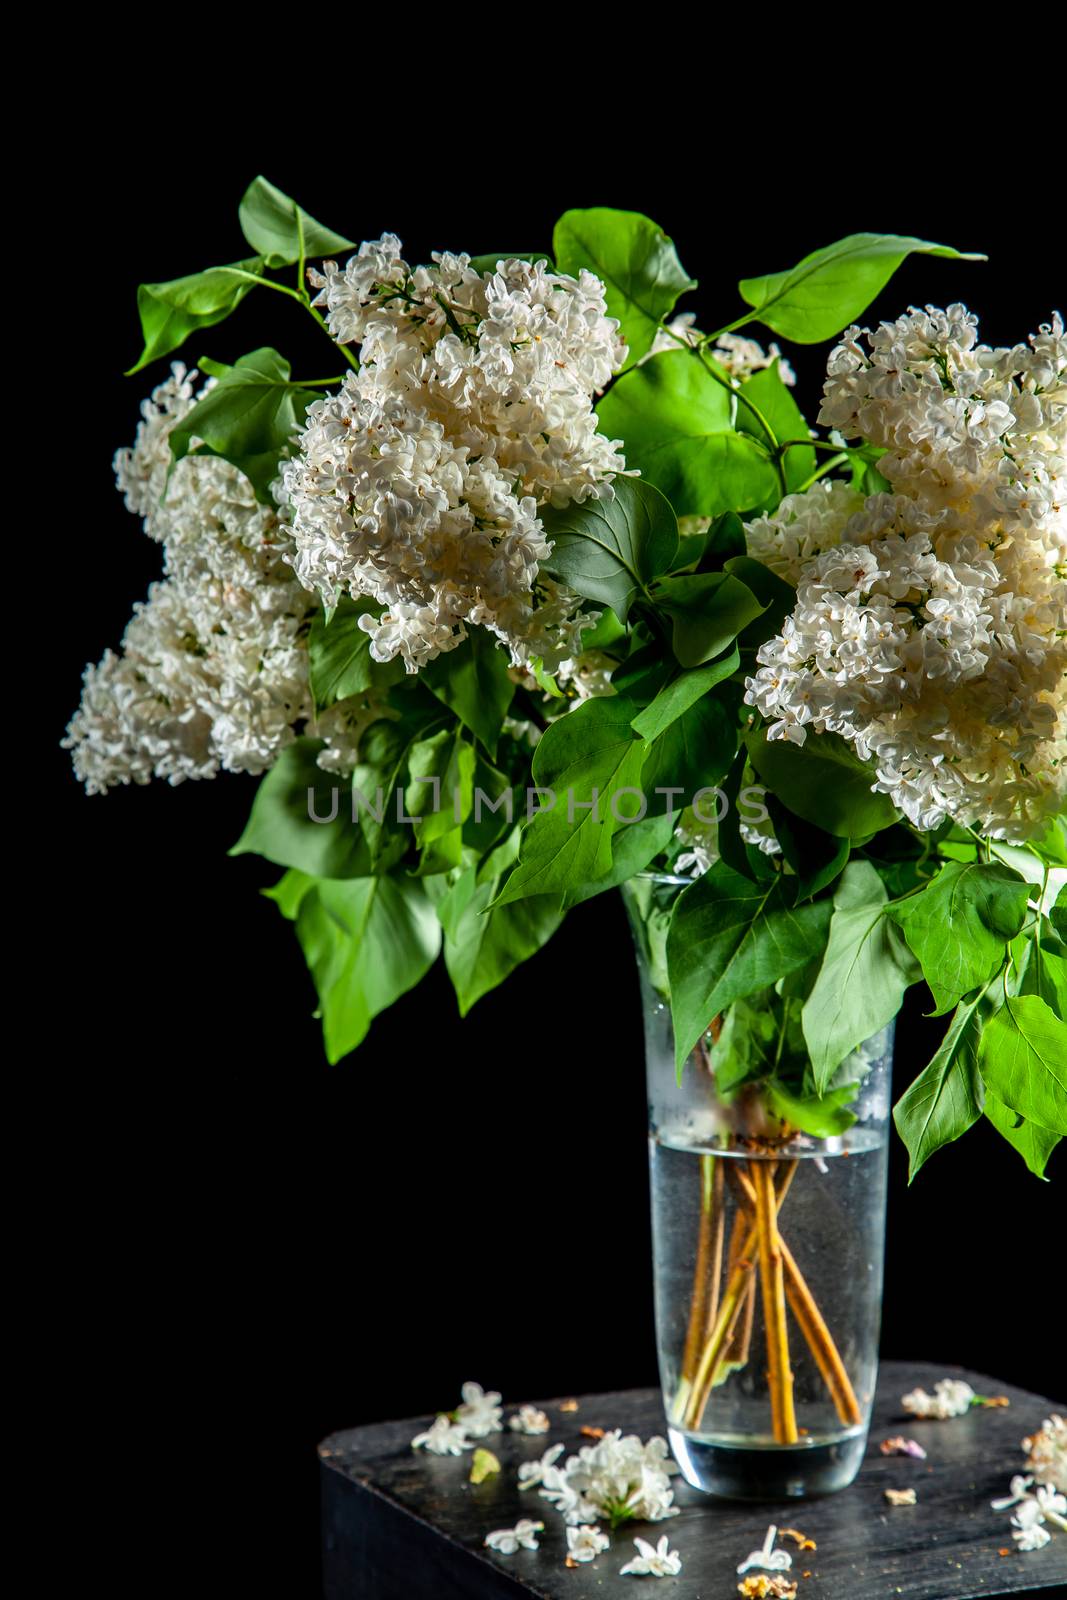 Branches of white lilac in glass vase on black background. Spring branch of blooming lilac on the table with black background. Fallen lilac flowers on the table.